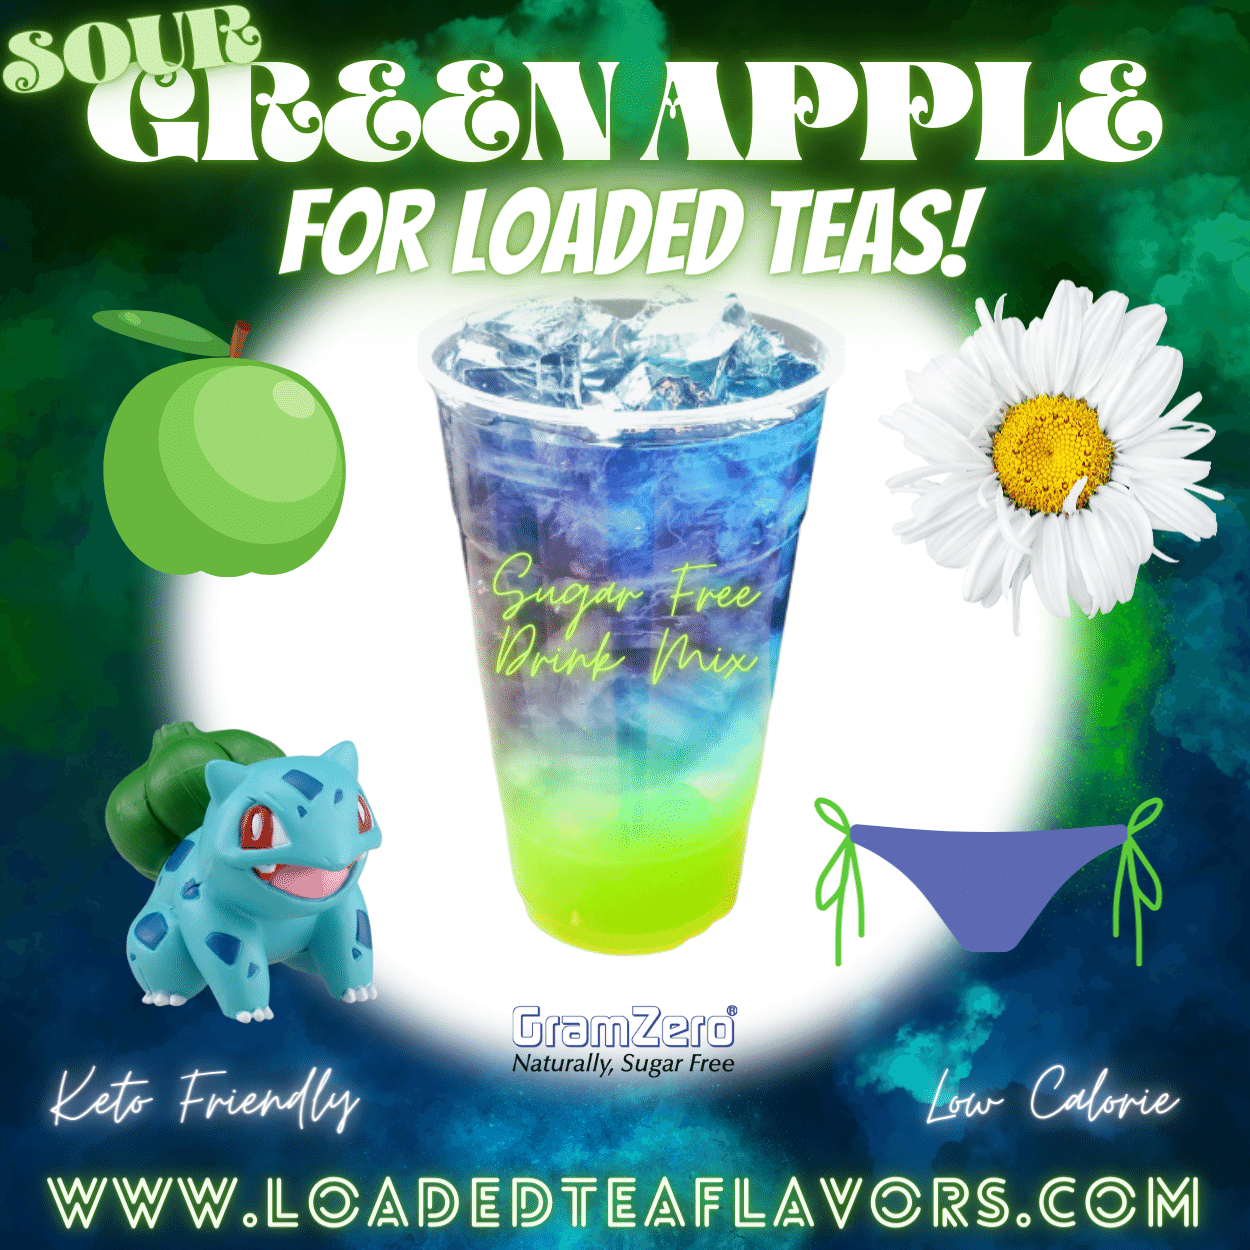 SOUR GREEN APPLE Sugar Free Drink Mix 😜🍏 Loaded Tea Flavoring